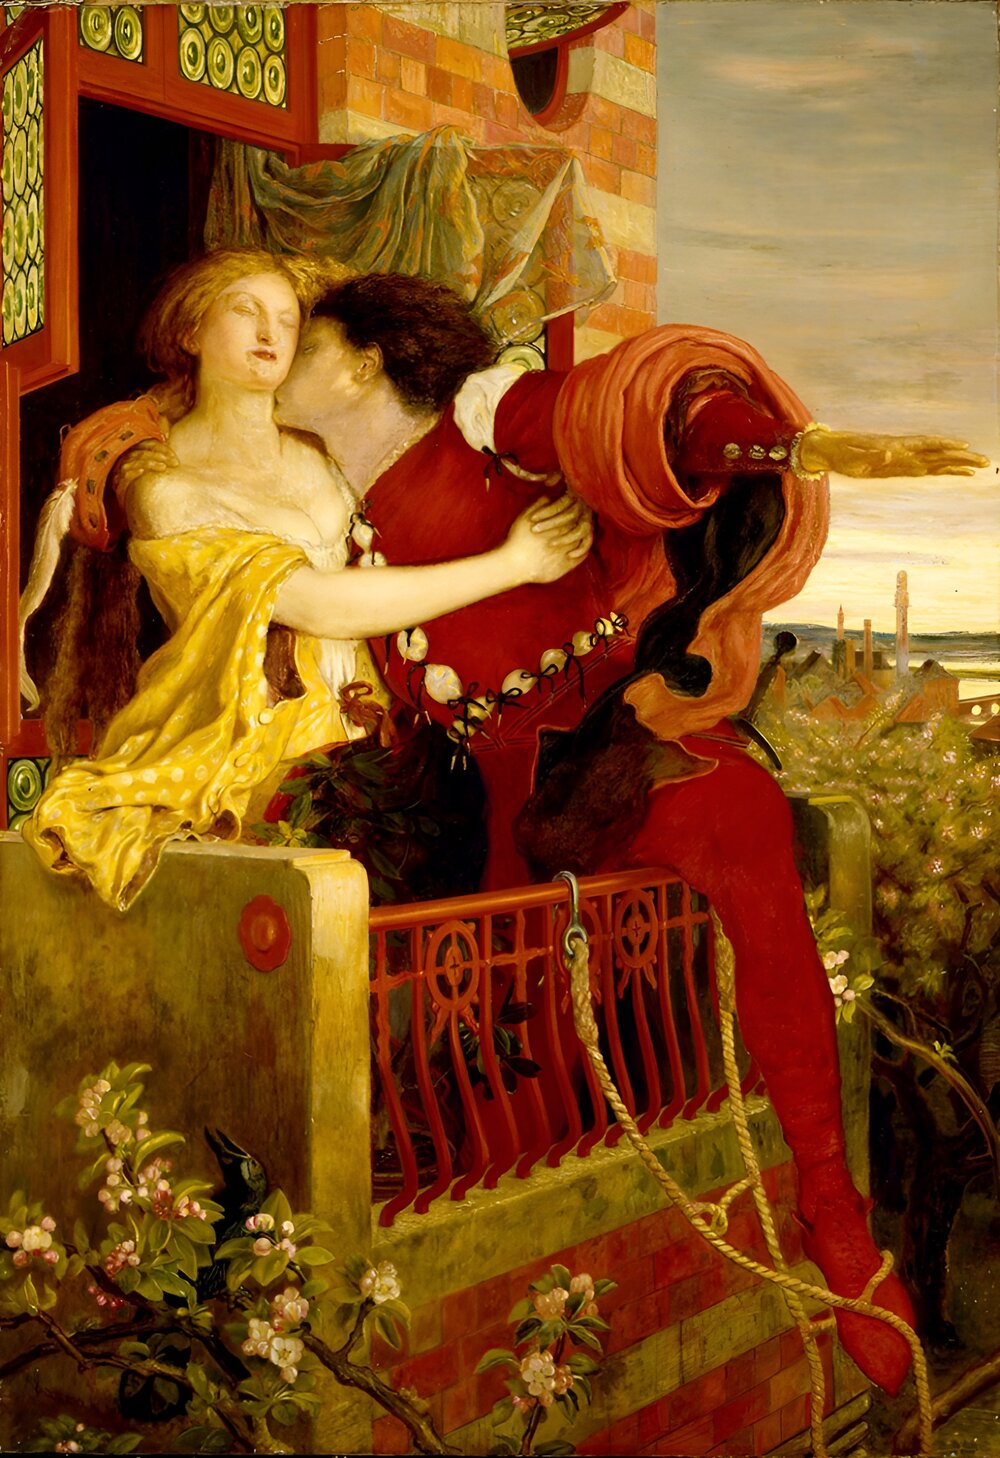 Romeo and Juliet parting on the balcony in Act III by Ford Maddox Brown, 1866.